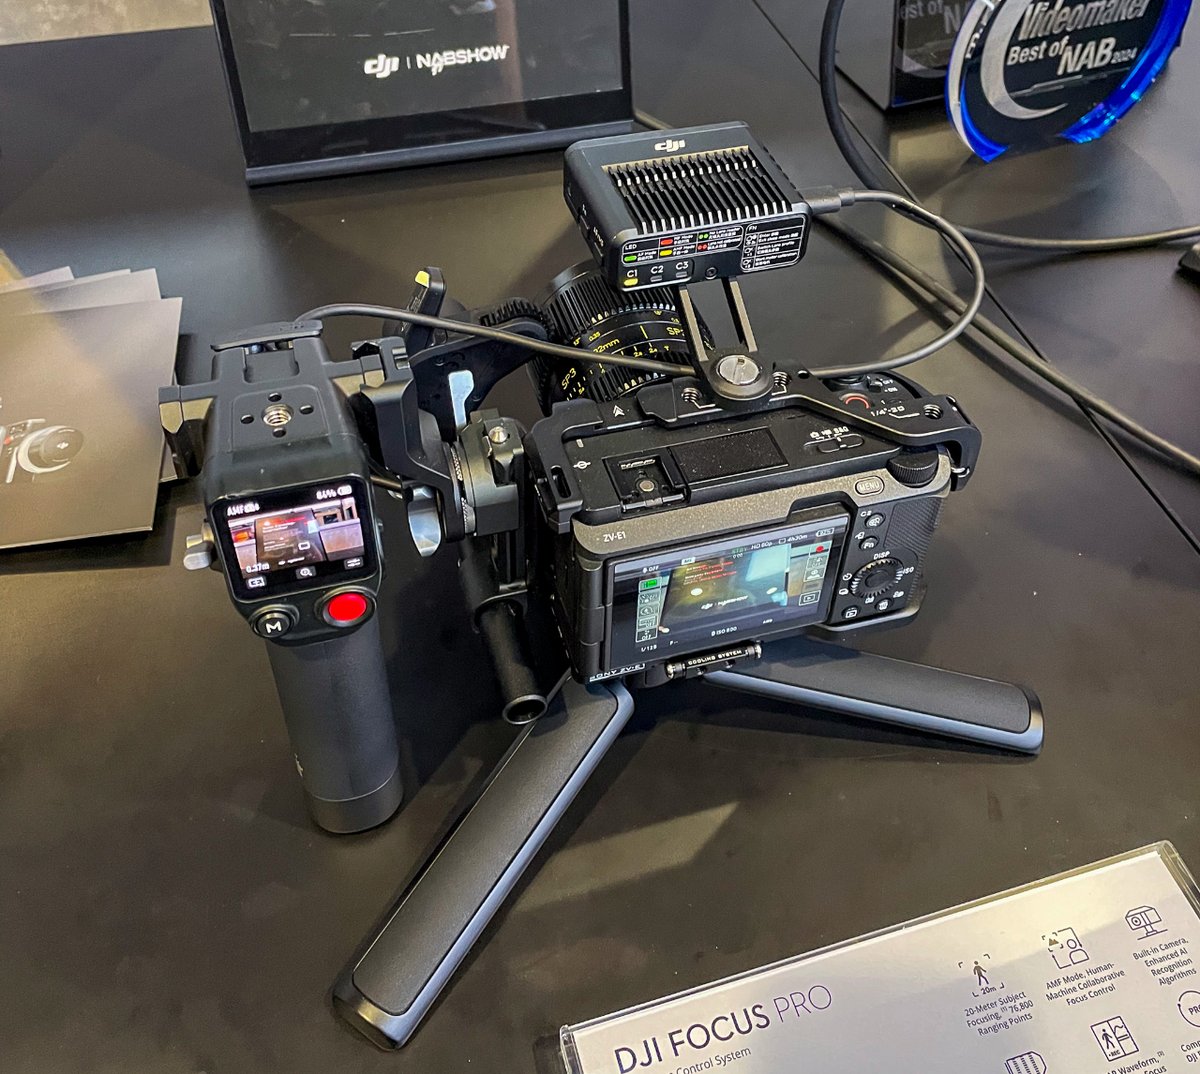 Recently shared my insights on what I saw at the DJI booth at NAB 2024 in my latest blog post. Get the scoop on the game-changing Ronin RS4 and RS4 Pro. Read more: thomasmeek.weebly.com/blog/nab-2024 #DJI #NAB #Stabilizers #videoproduction #filmmaking #NABshow #NAB2024